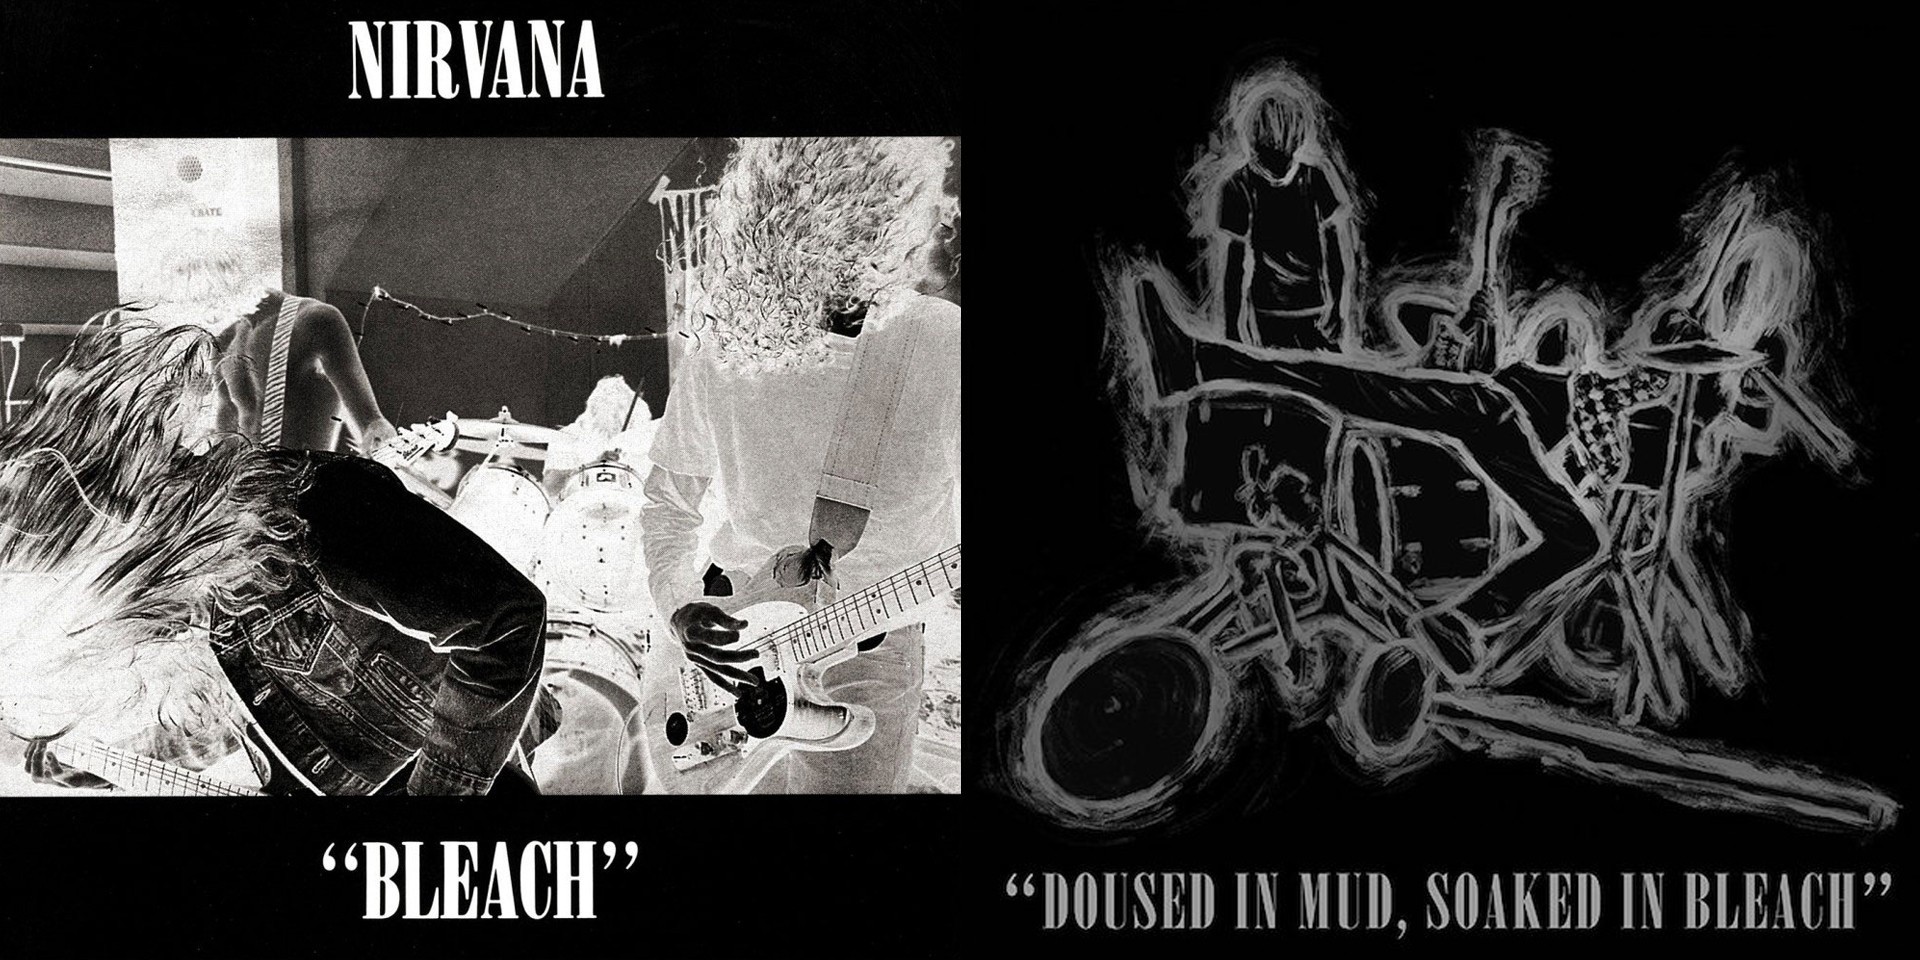 LISTEN: Nirvana gets reimagined by modern metal and hardcore bands